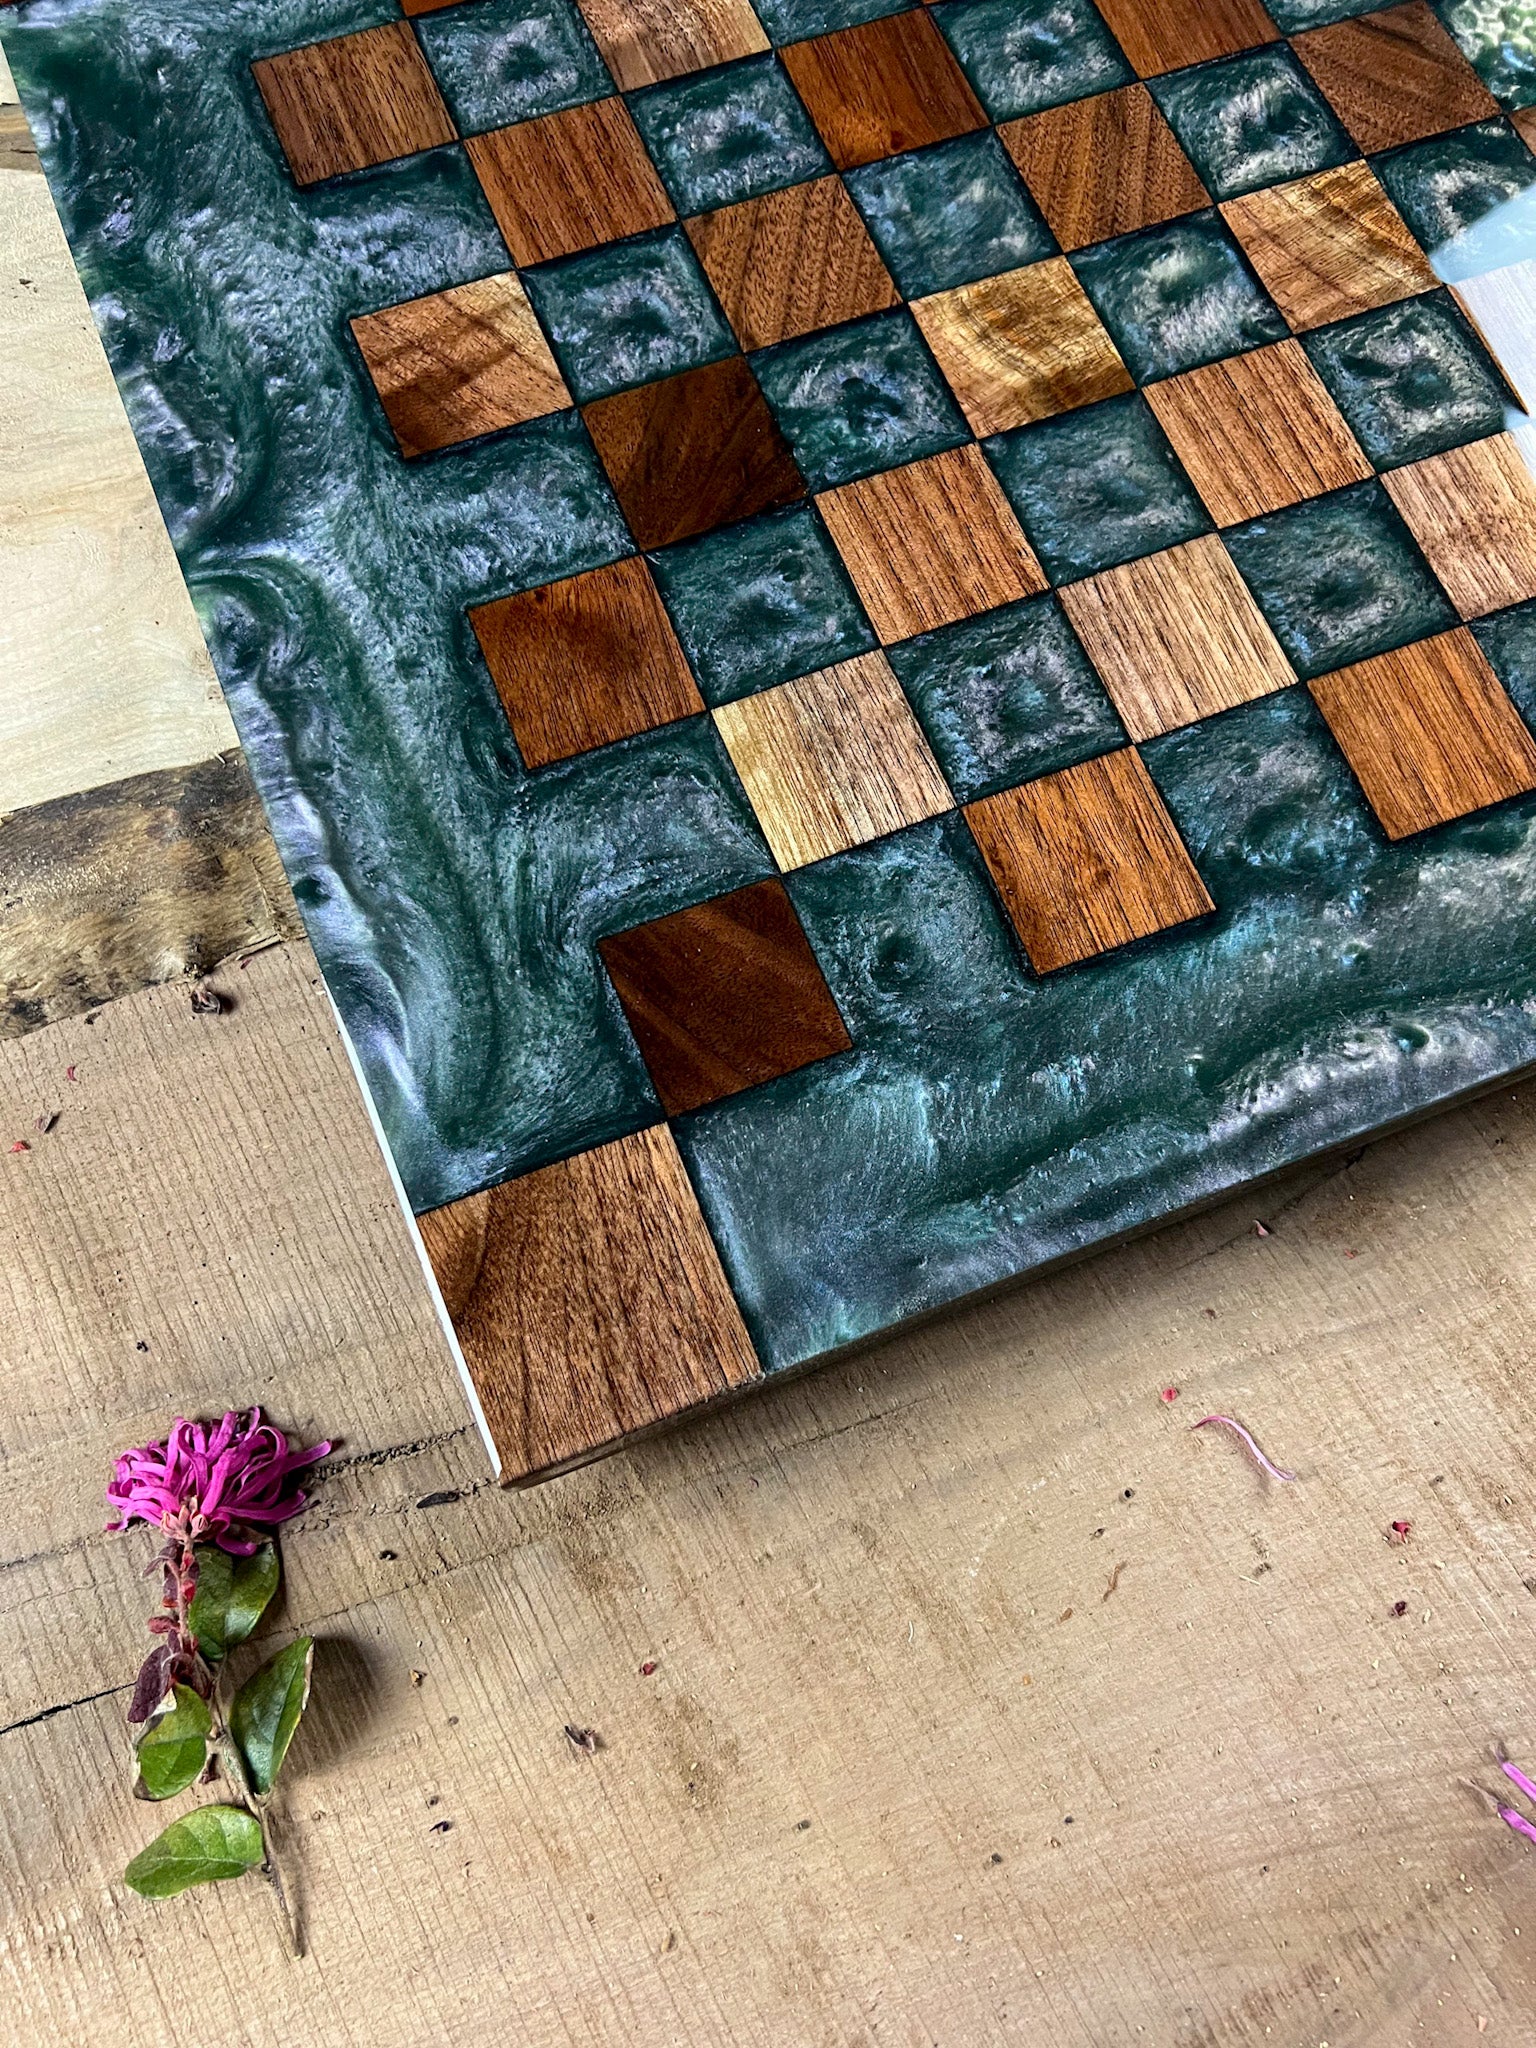 Chaos Walnut Chess Board (Chameleon Color Shifting)